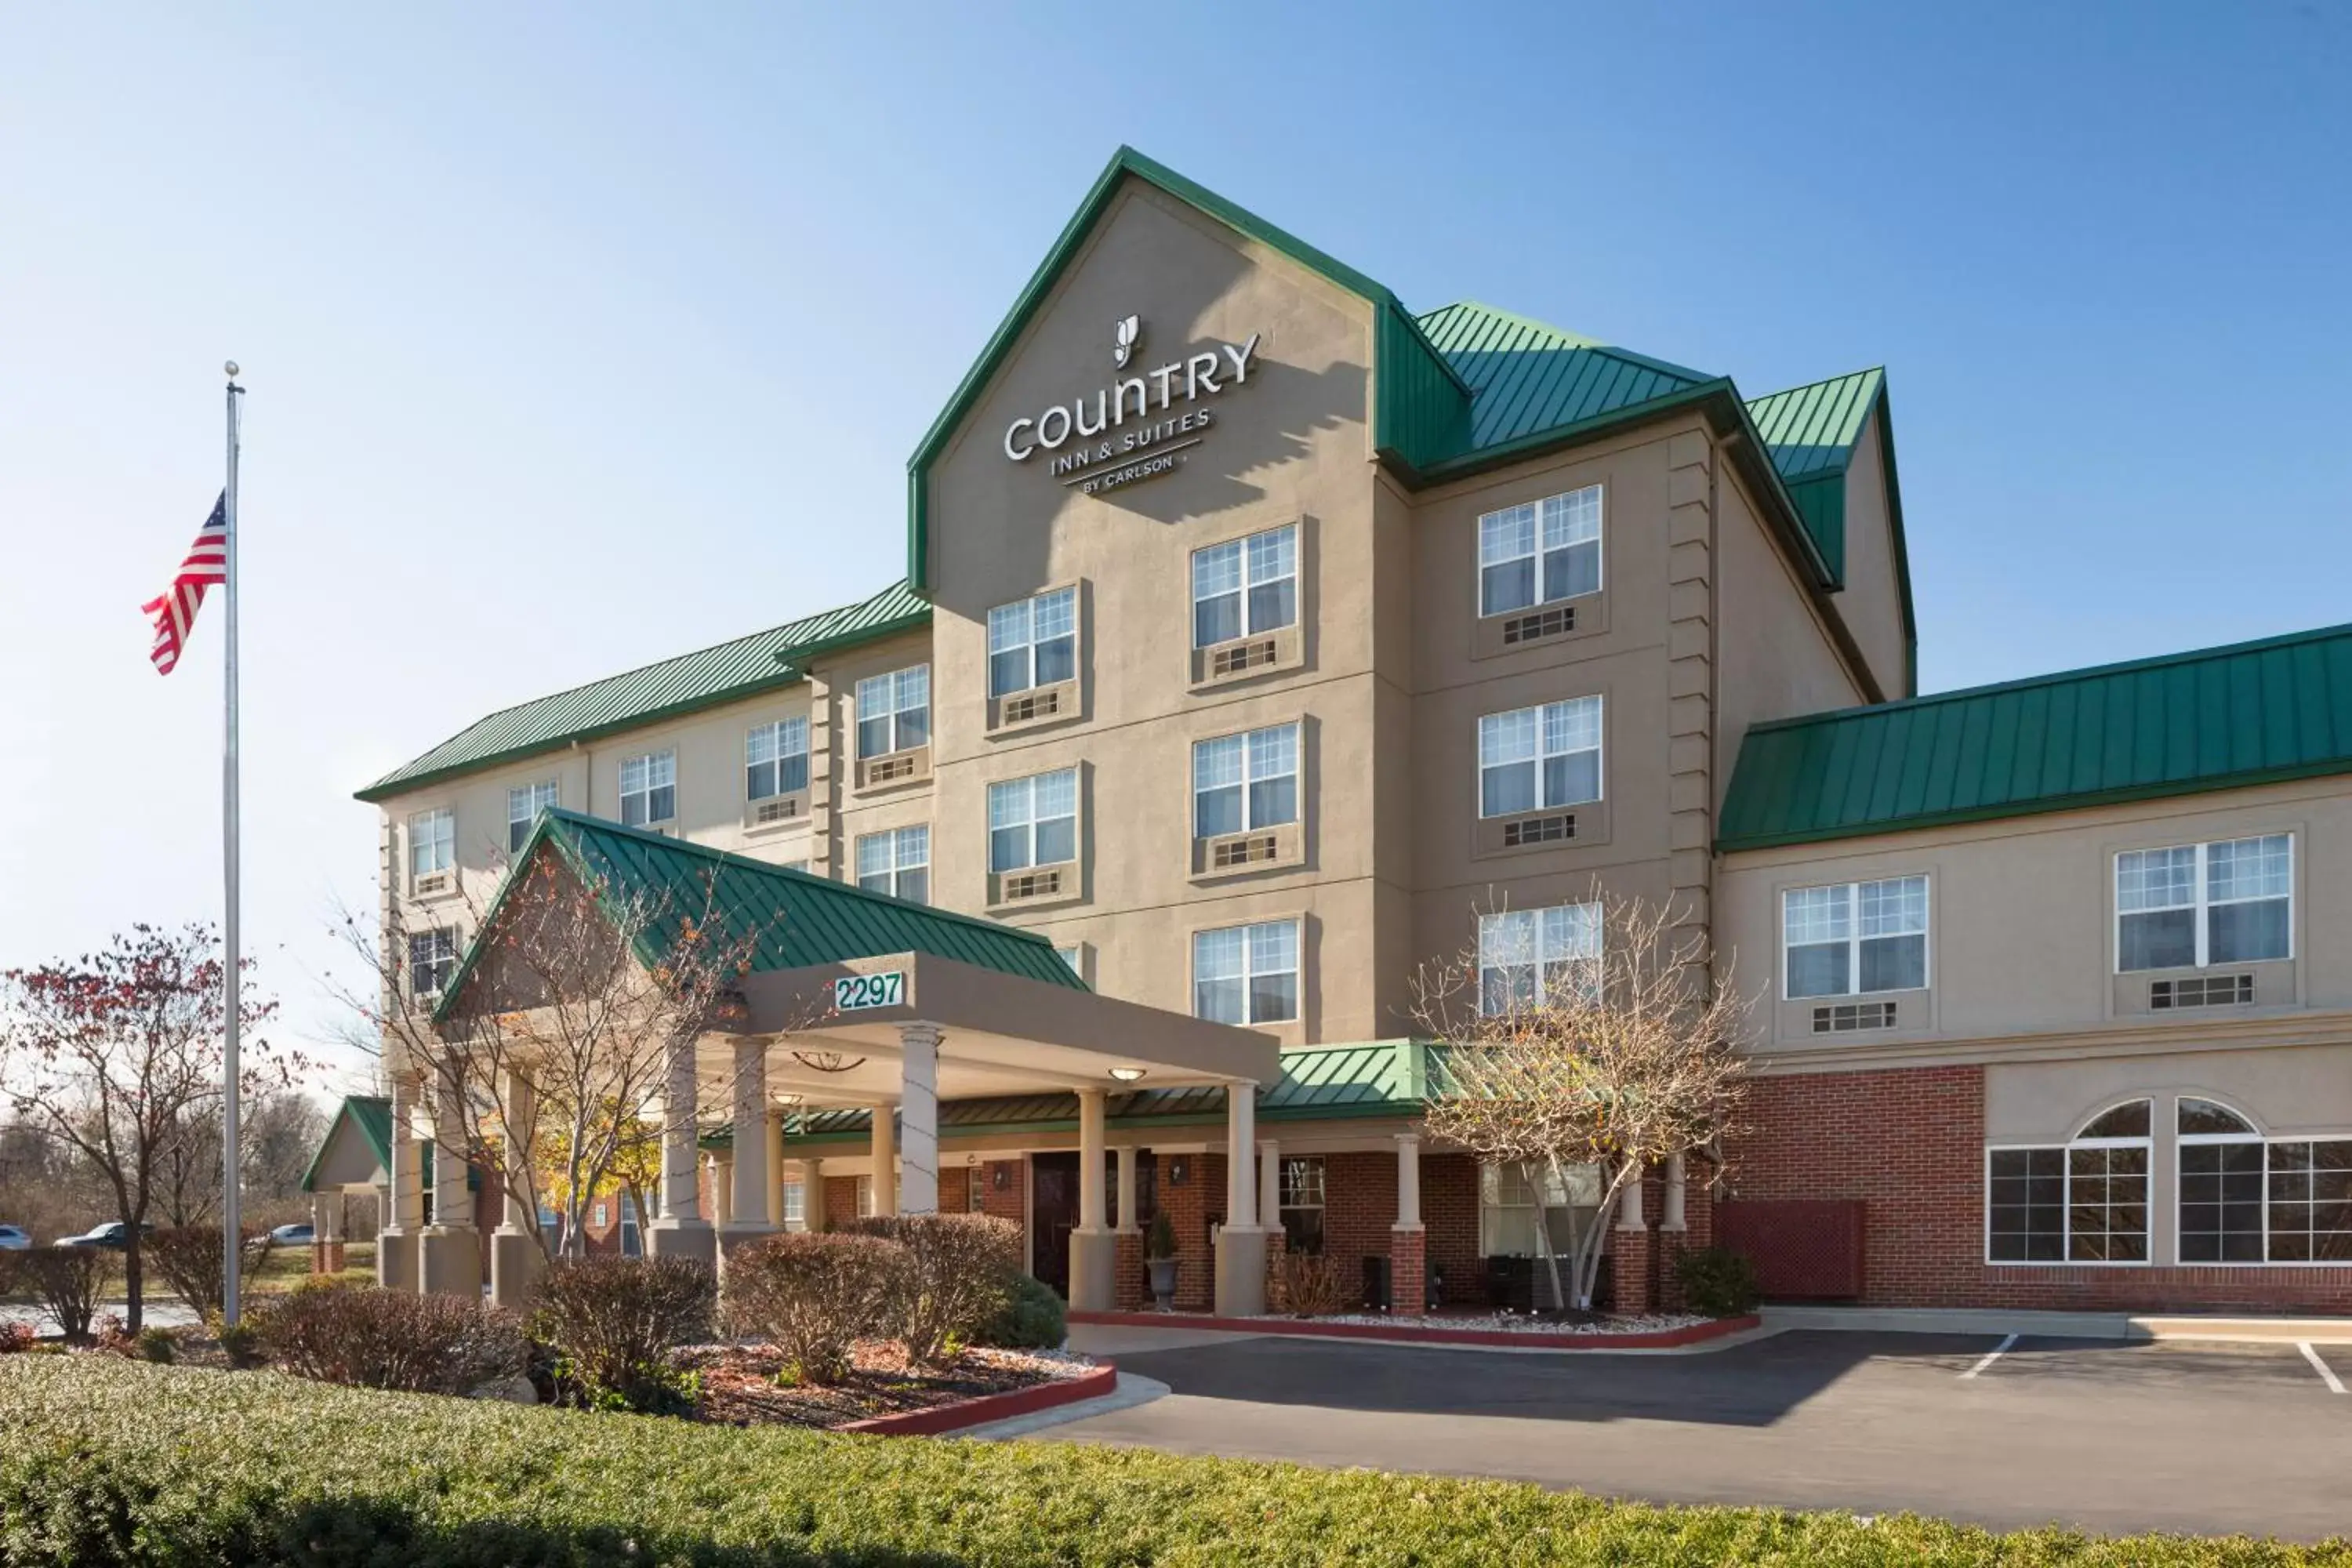 Facade/entrance, Property Building in Country Inn & Suites by Radisson, Lexington, KY